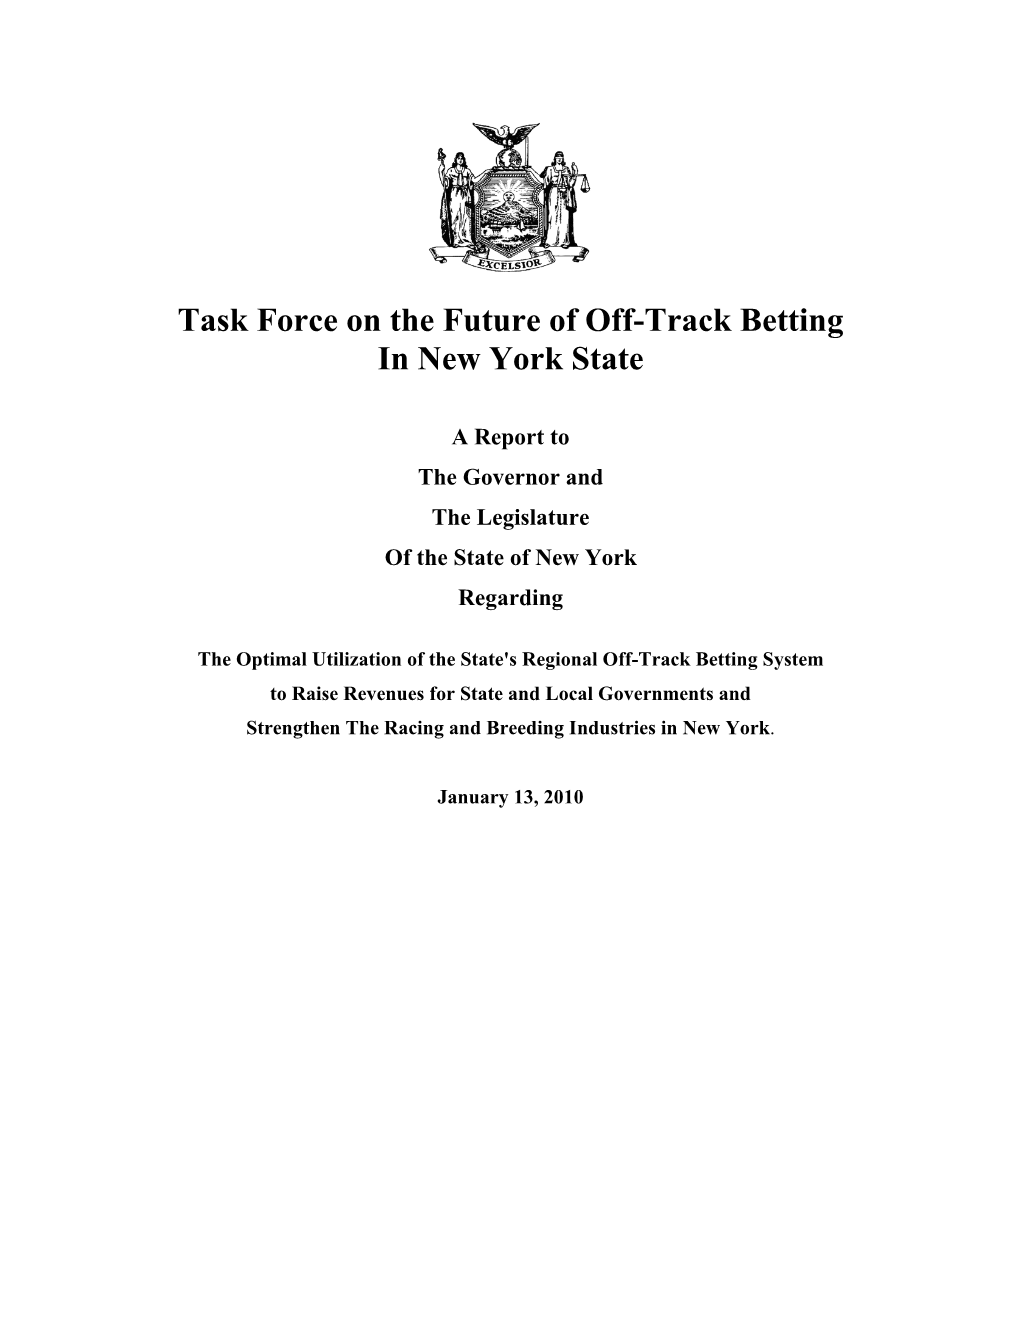 Task Force on the Future of Off-Track Betting in New York State